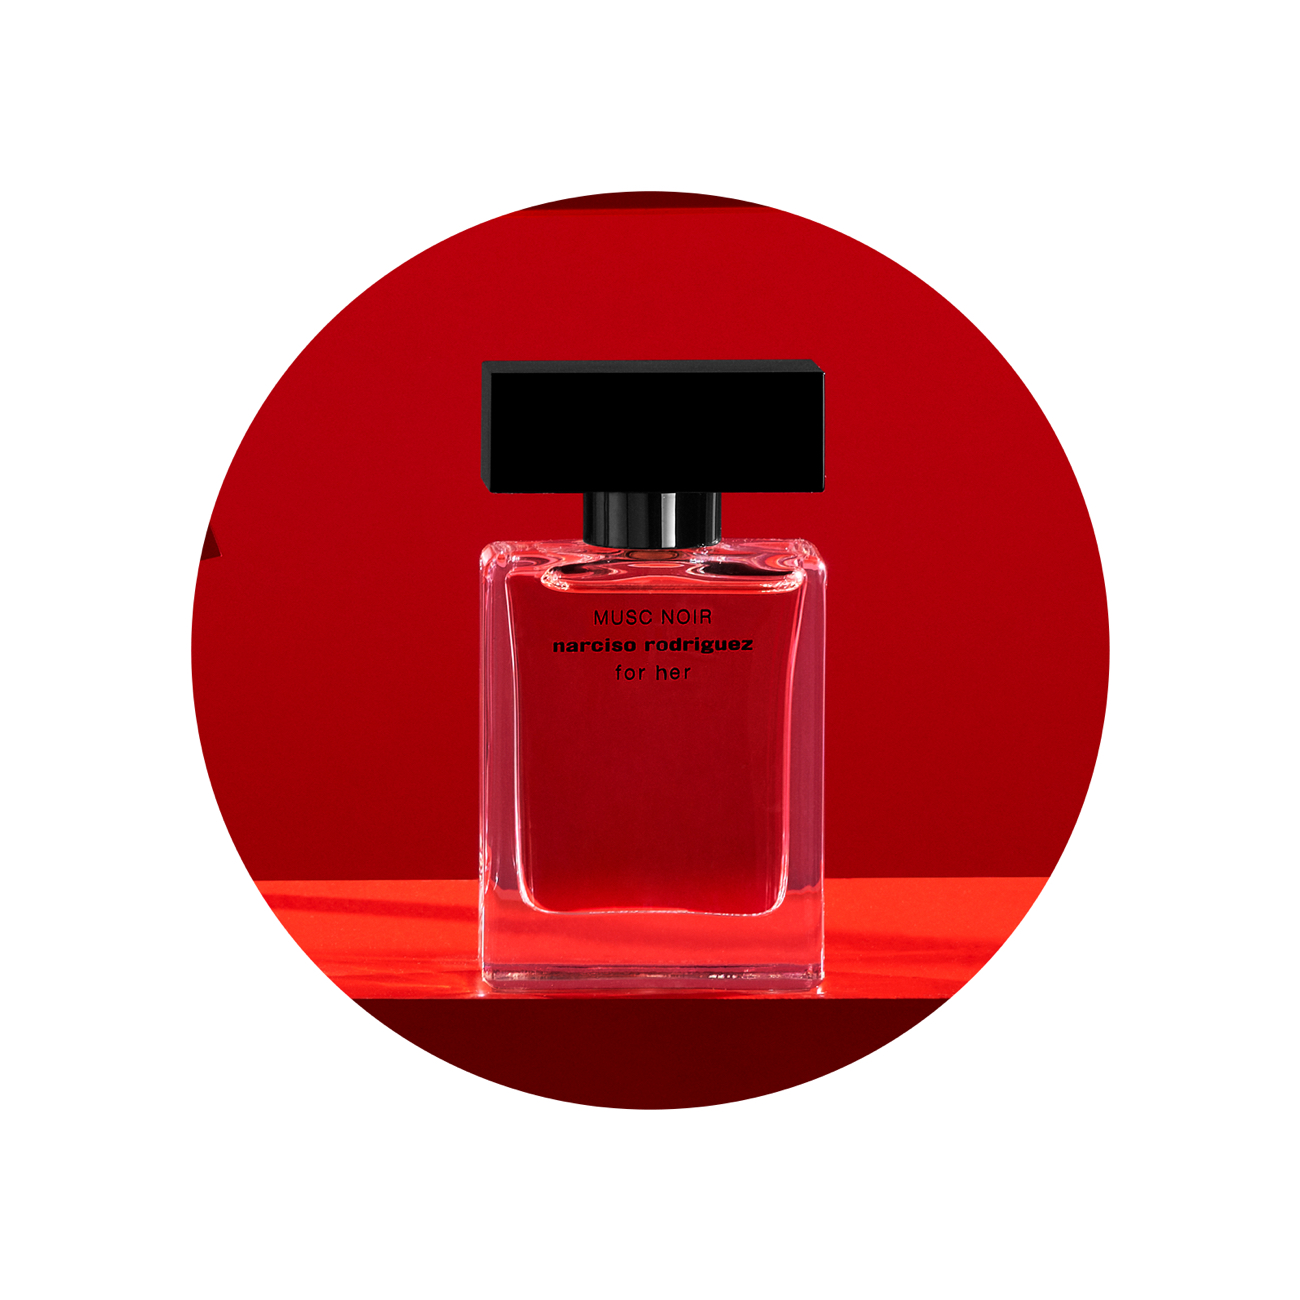 Narciso Rodriguez Musc Noir for her